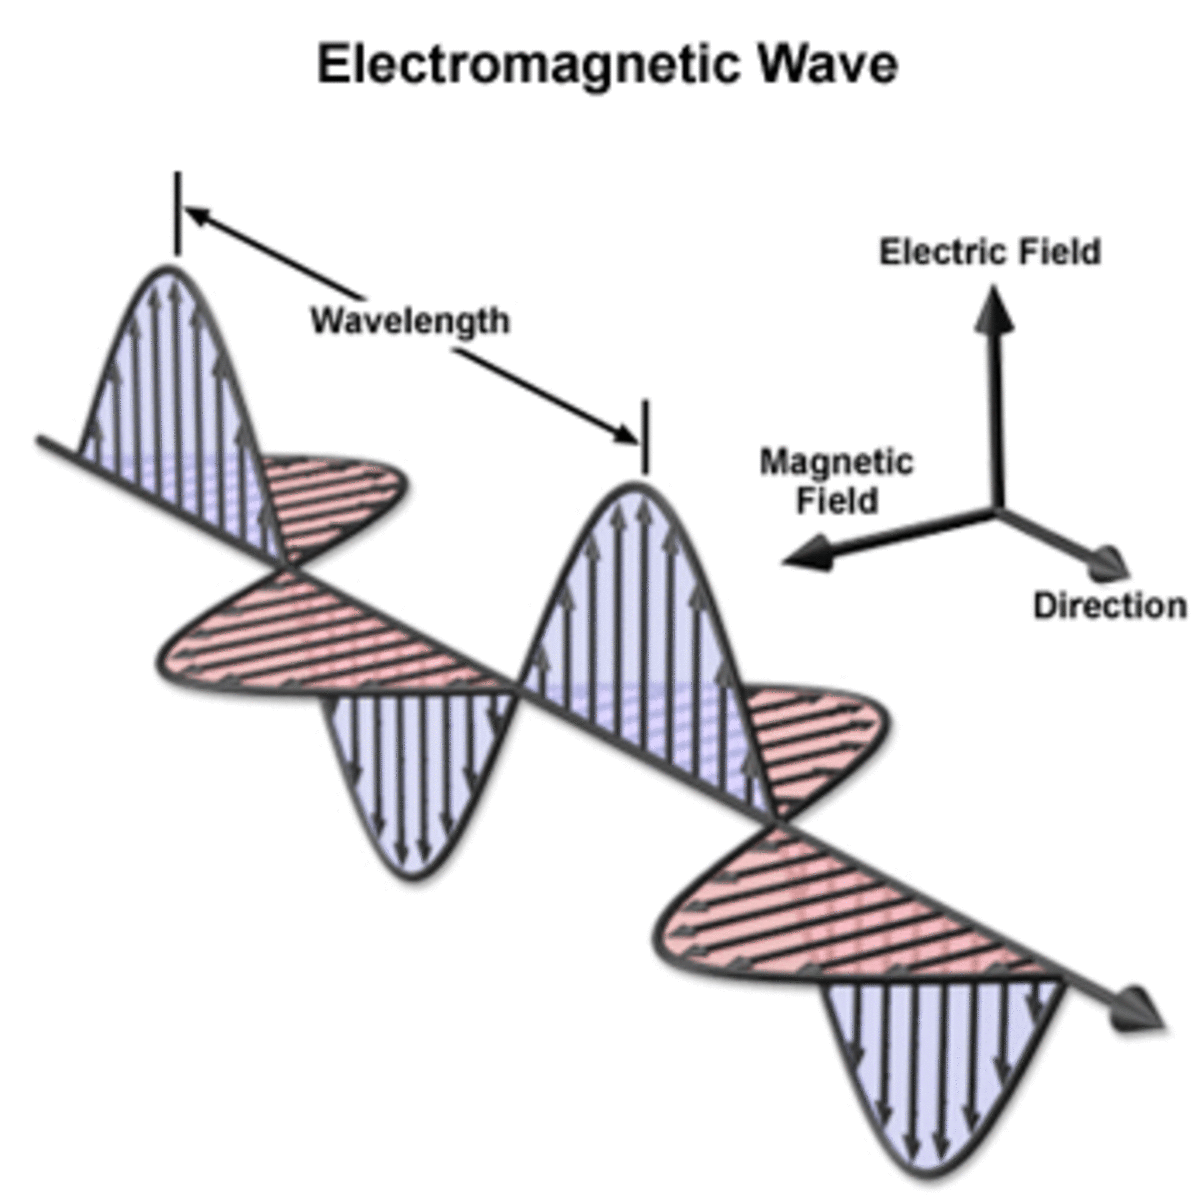 Ride the wave, bro': Shown here is an 'electromagnetic wave' with electric fields and magnetic fields.